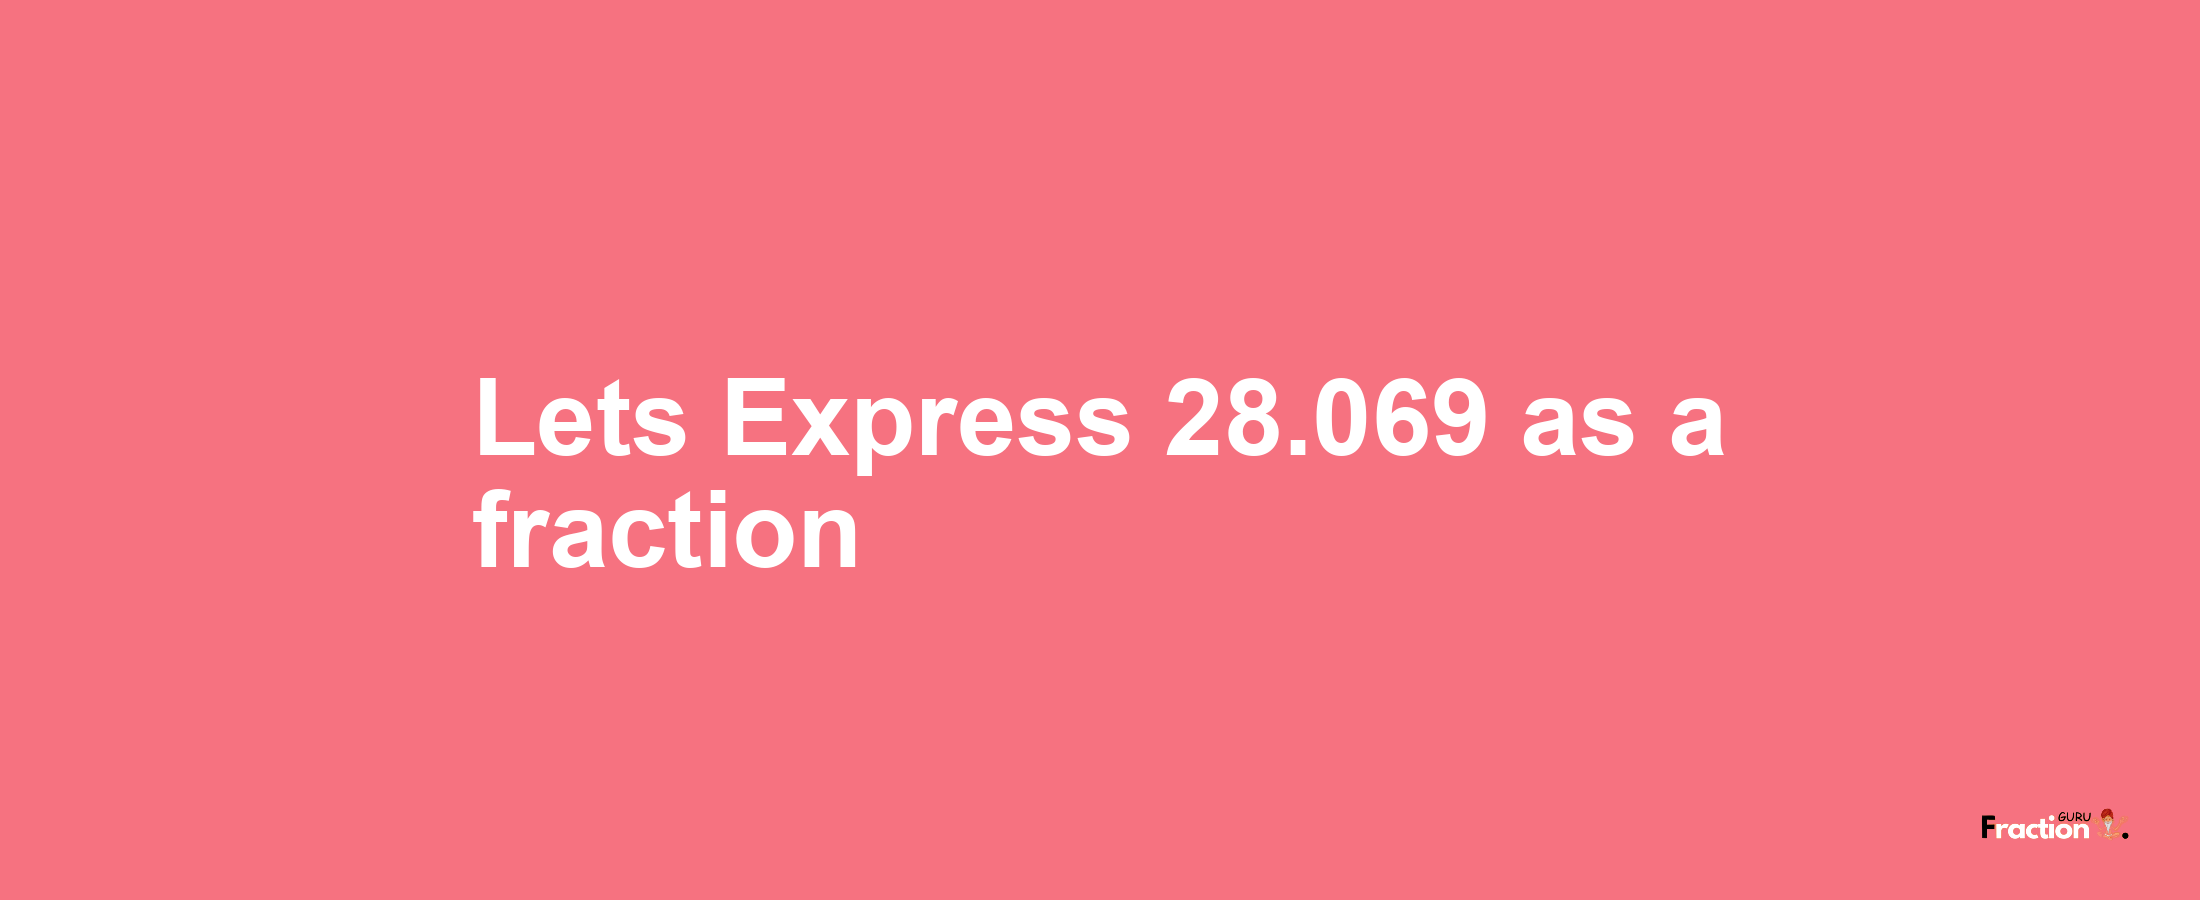 Lets Express 28.069 as afraction